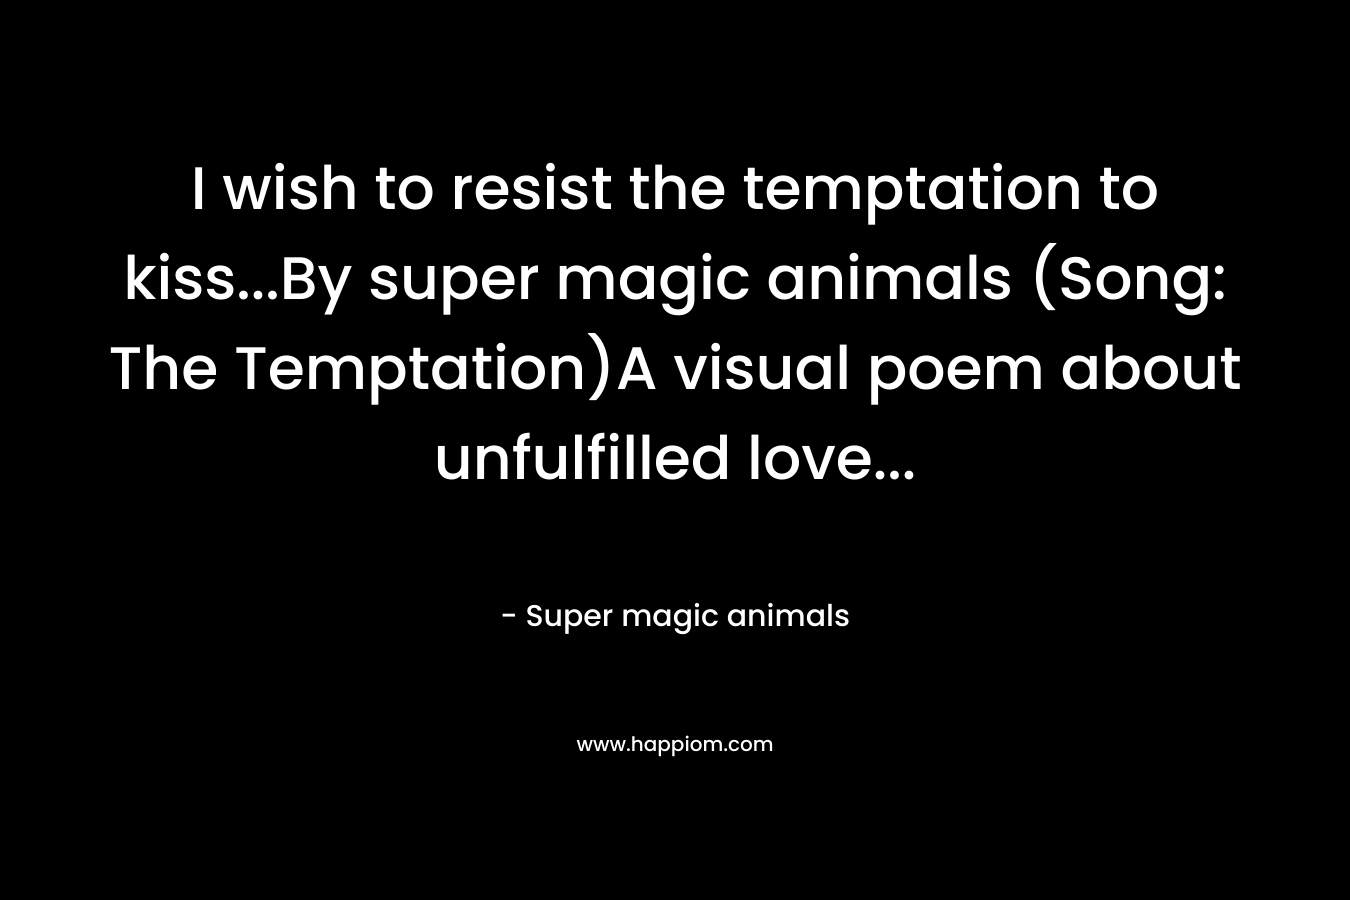 I wish to resist the temptation to kiss...By super magic animals (Song: The Temptation)A visual poem about unfulfilled love...